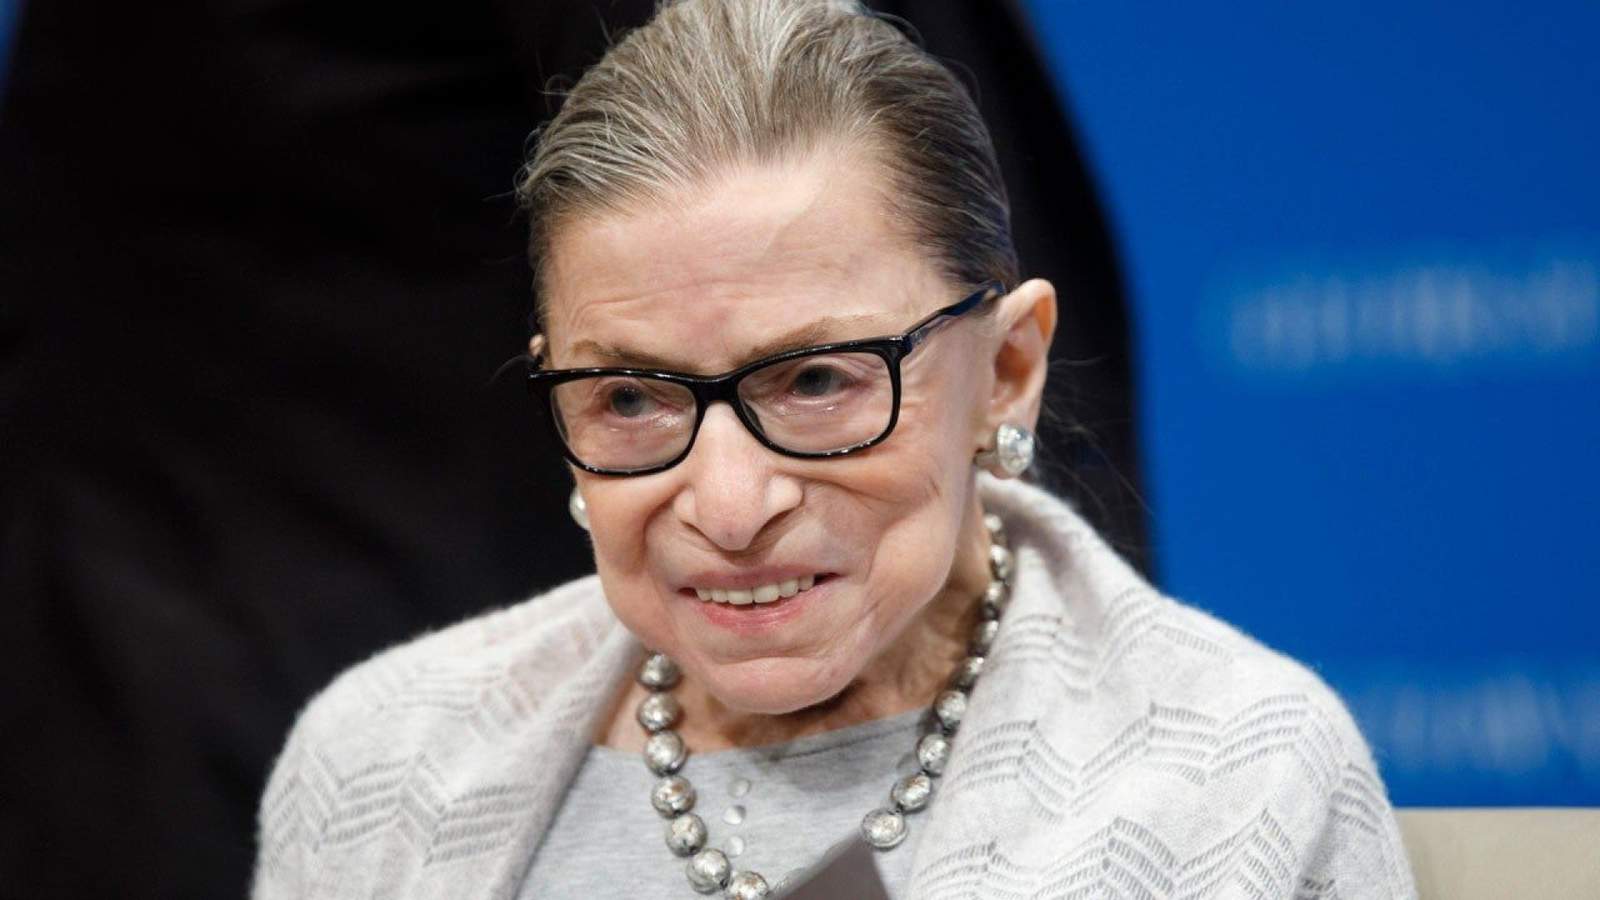 Texas leaders react to death of Justice Ruth Bader Ginsburg